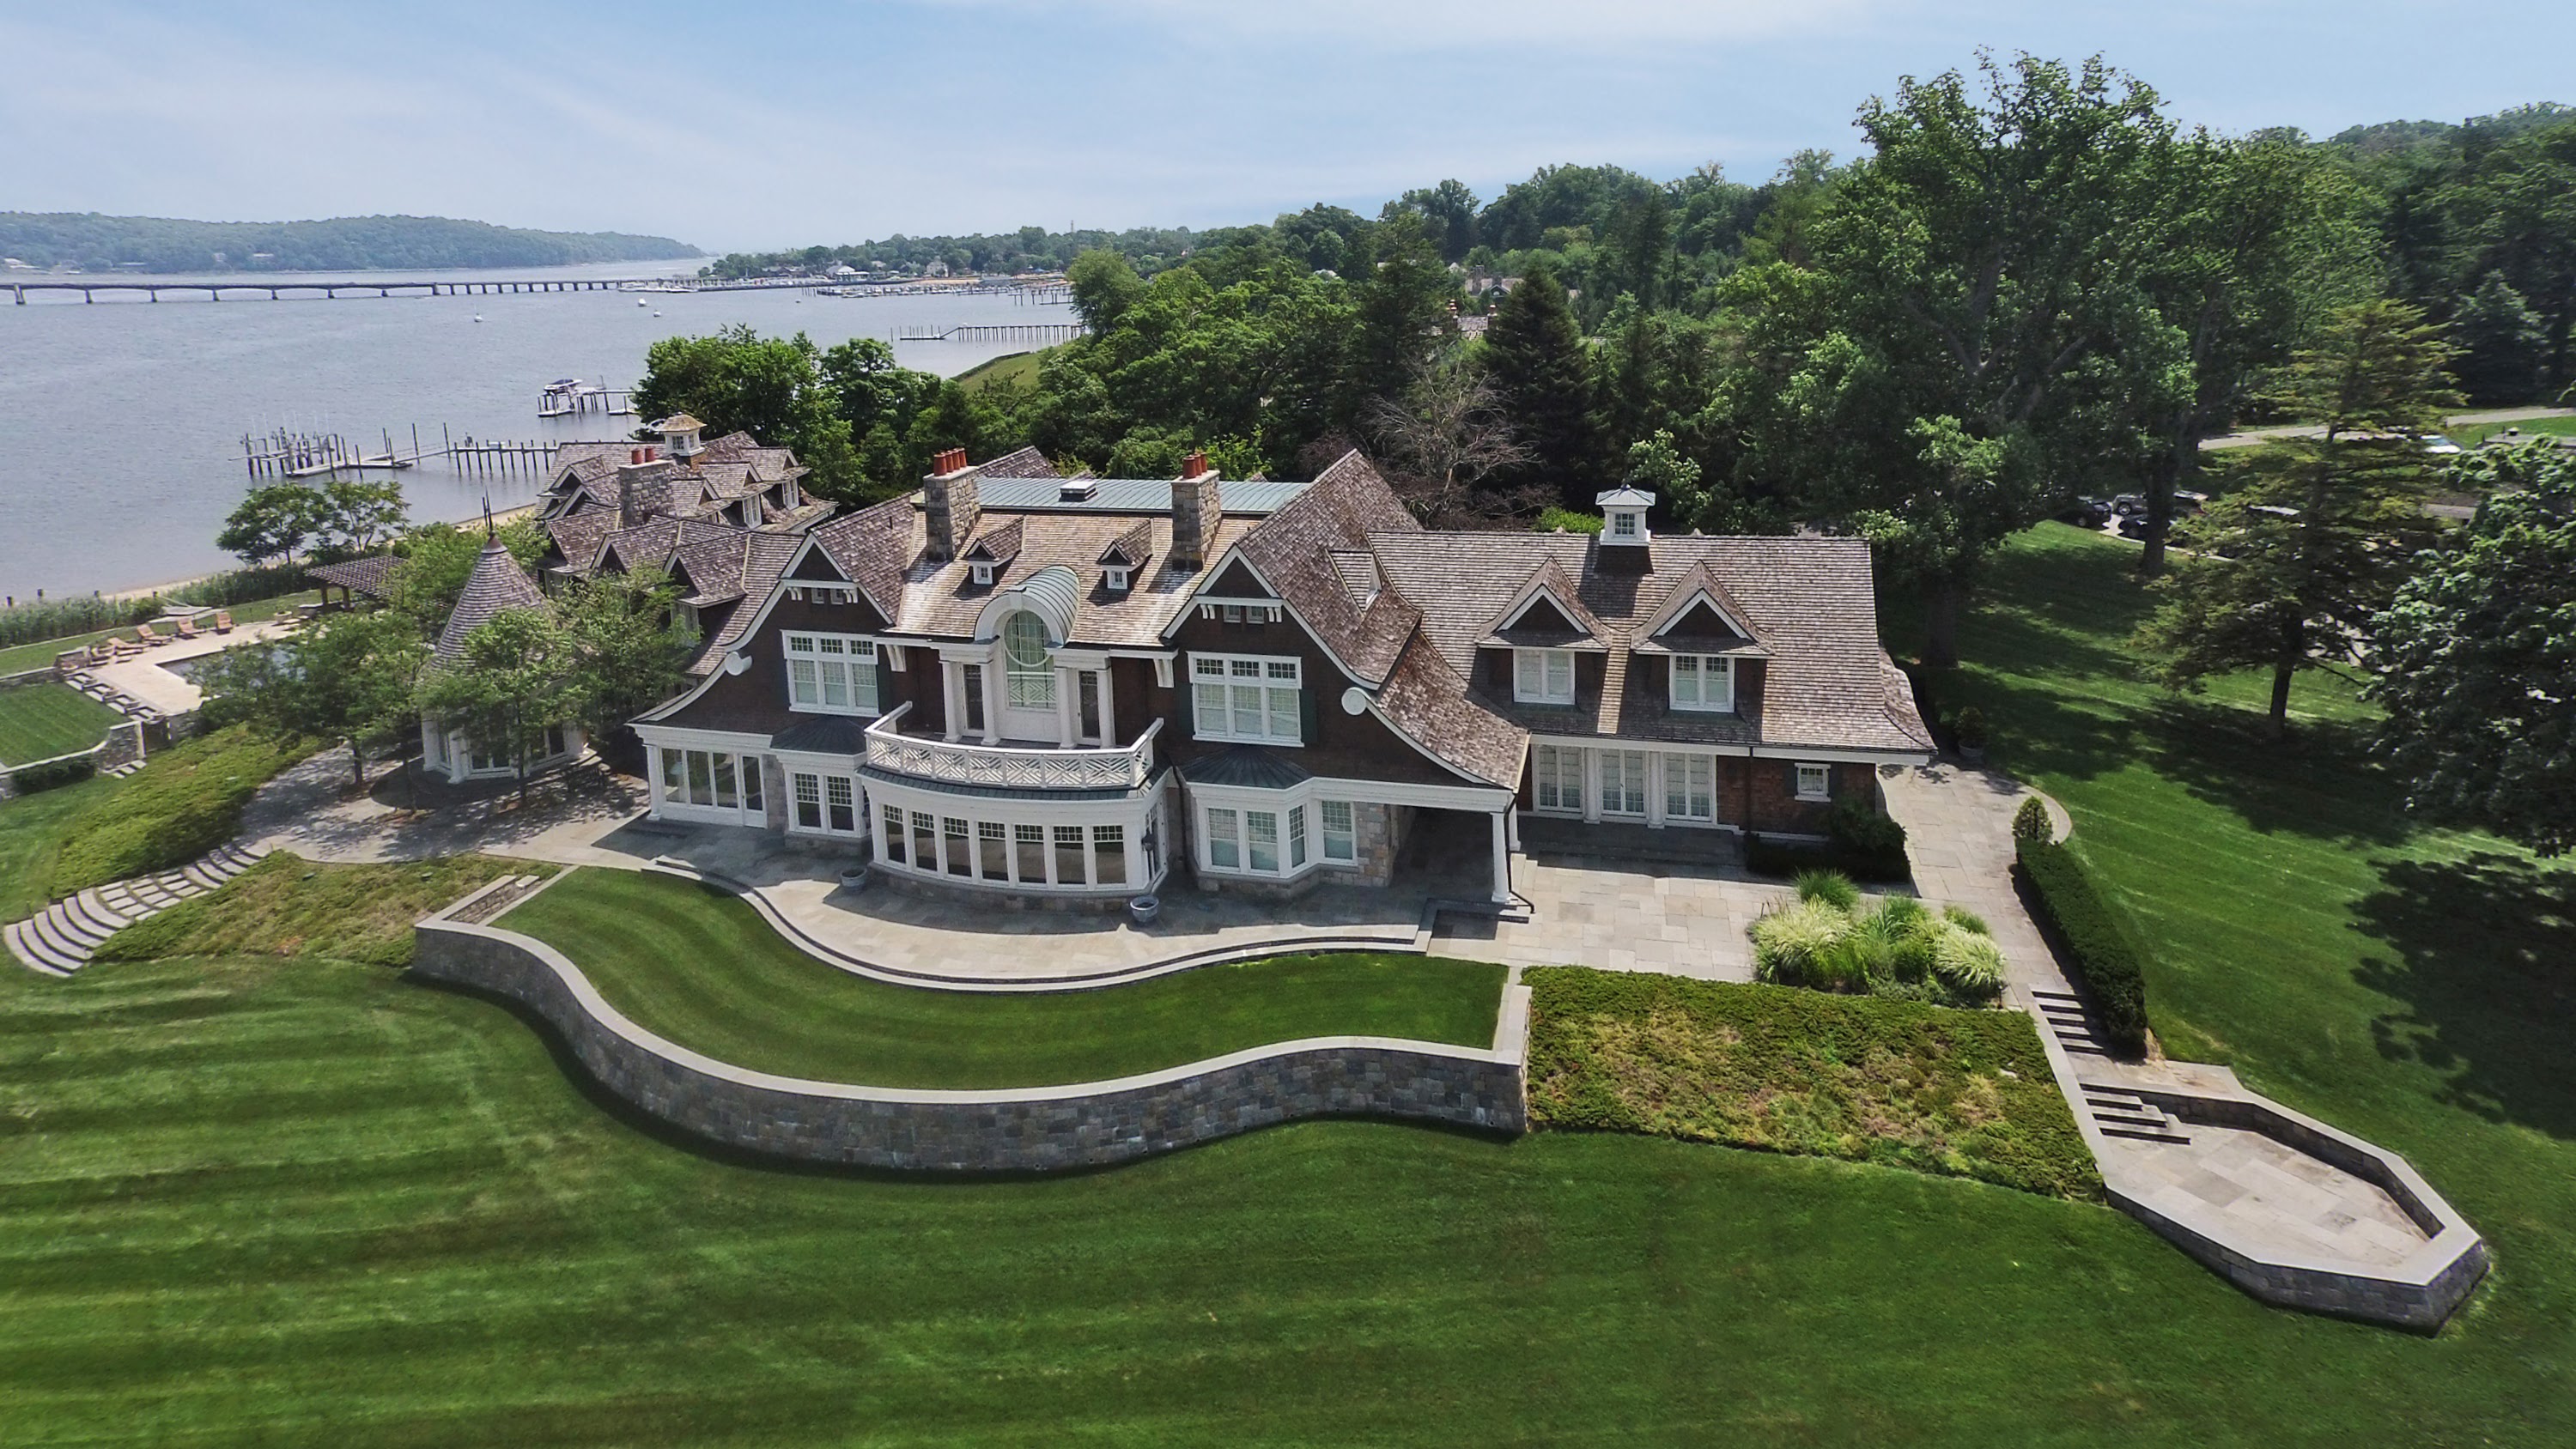 Resources Real Estate Luxury Real Estate in Monmouth County, NJ 732-212-0440